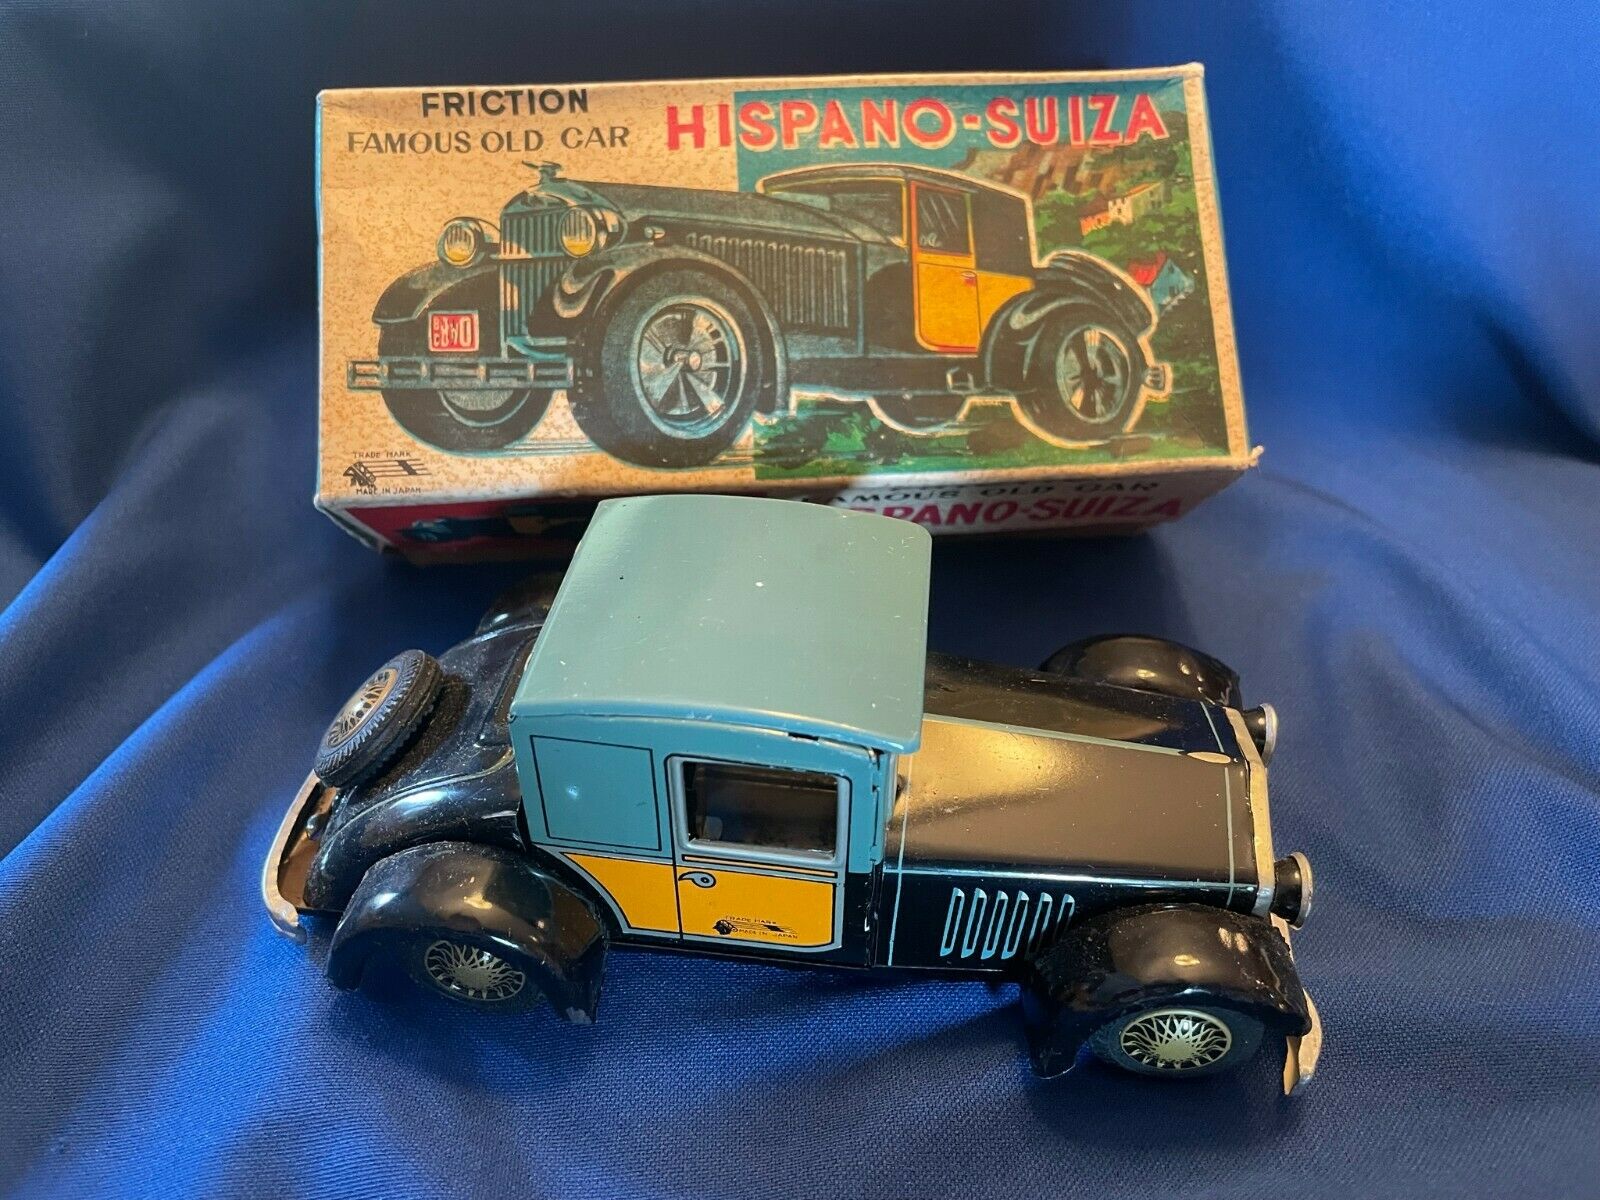 Vintage Hispano Suiza Famous Old Car New In Box Ichimura Japan Friction Tin Toy